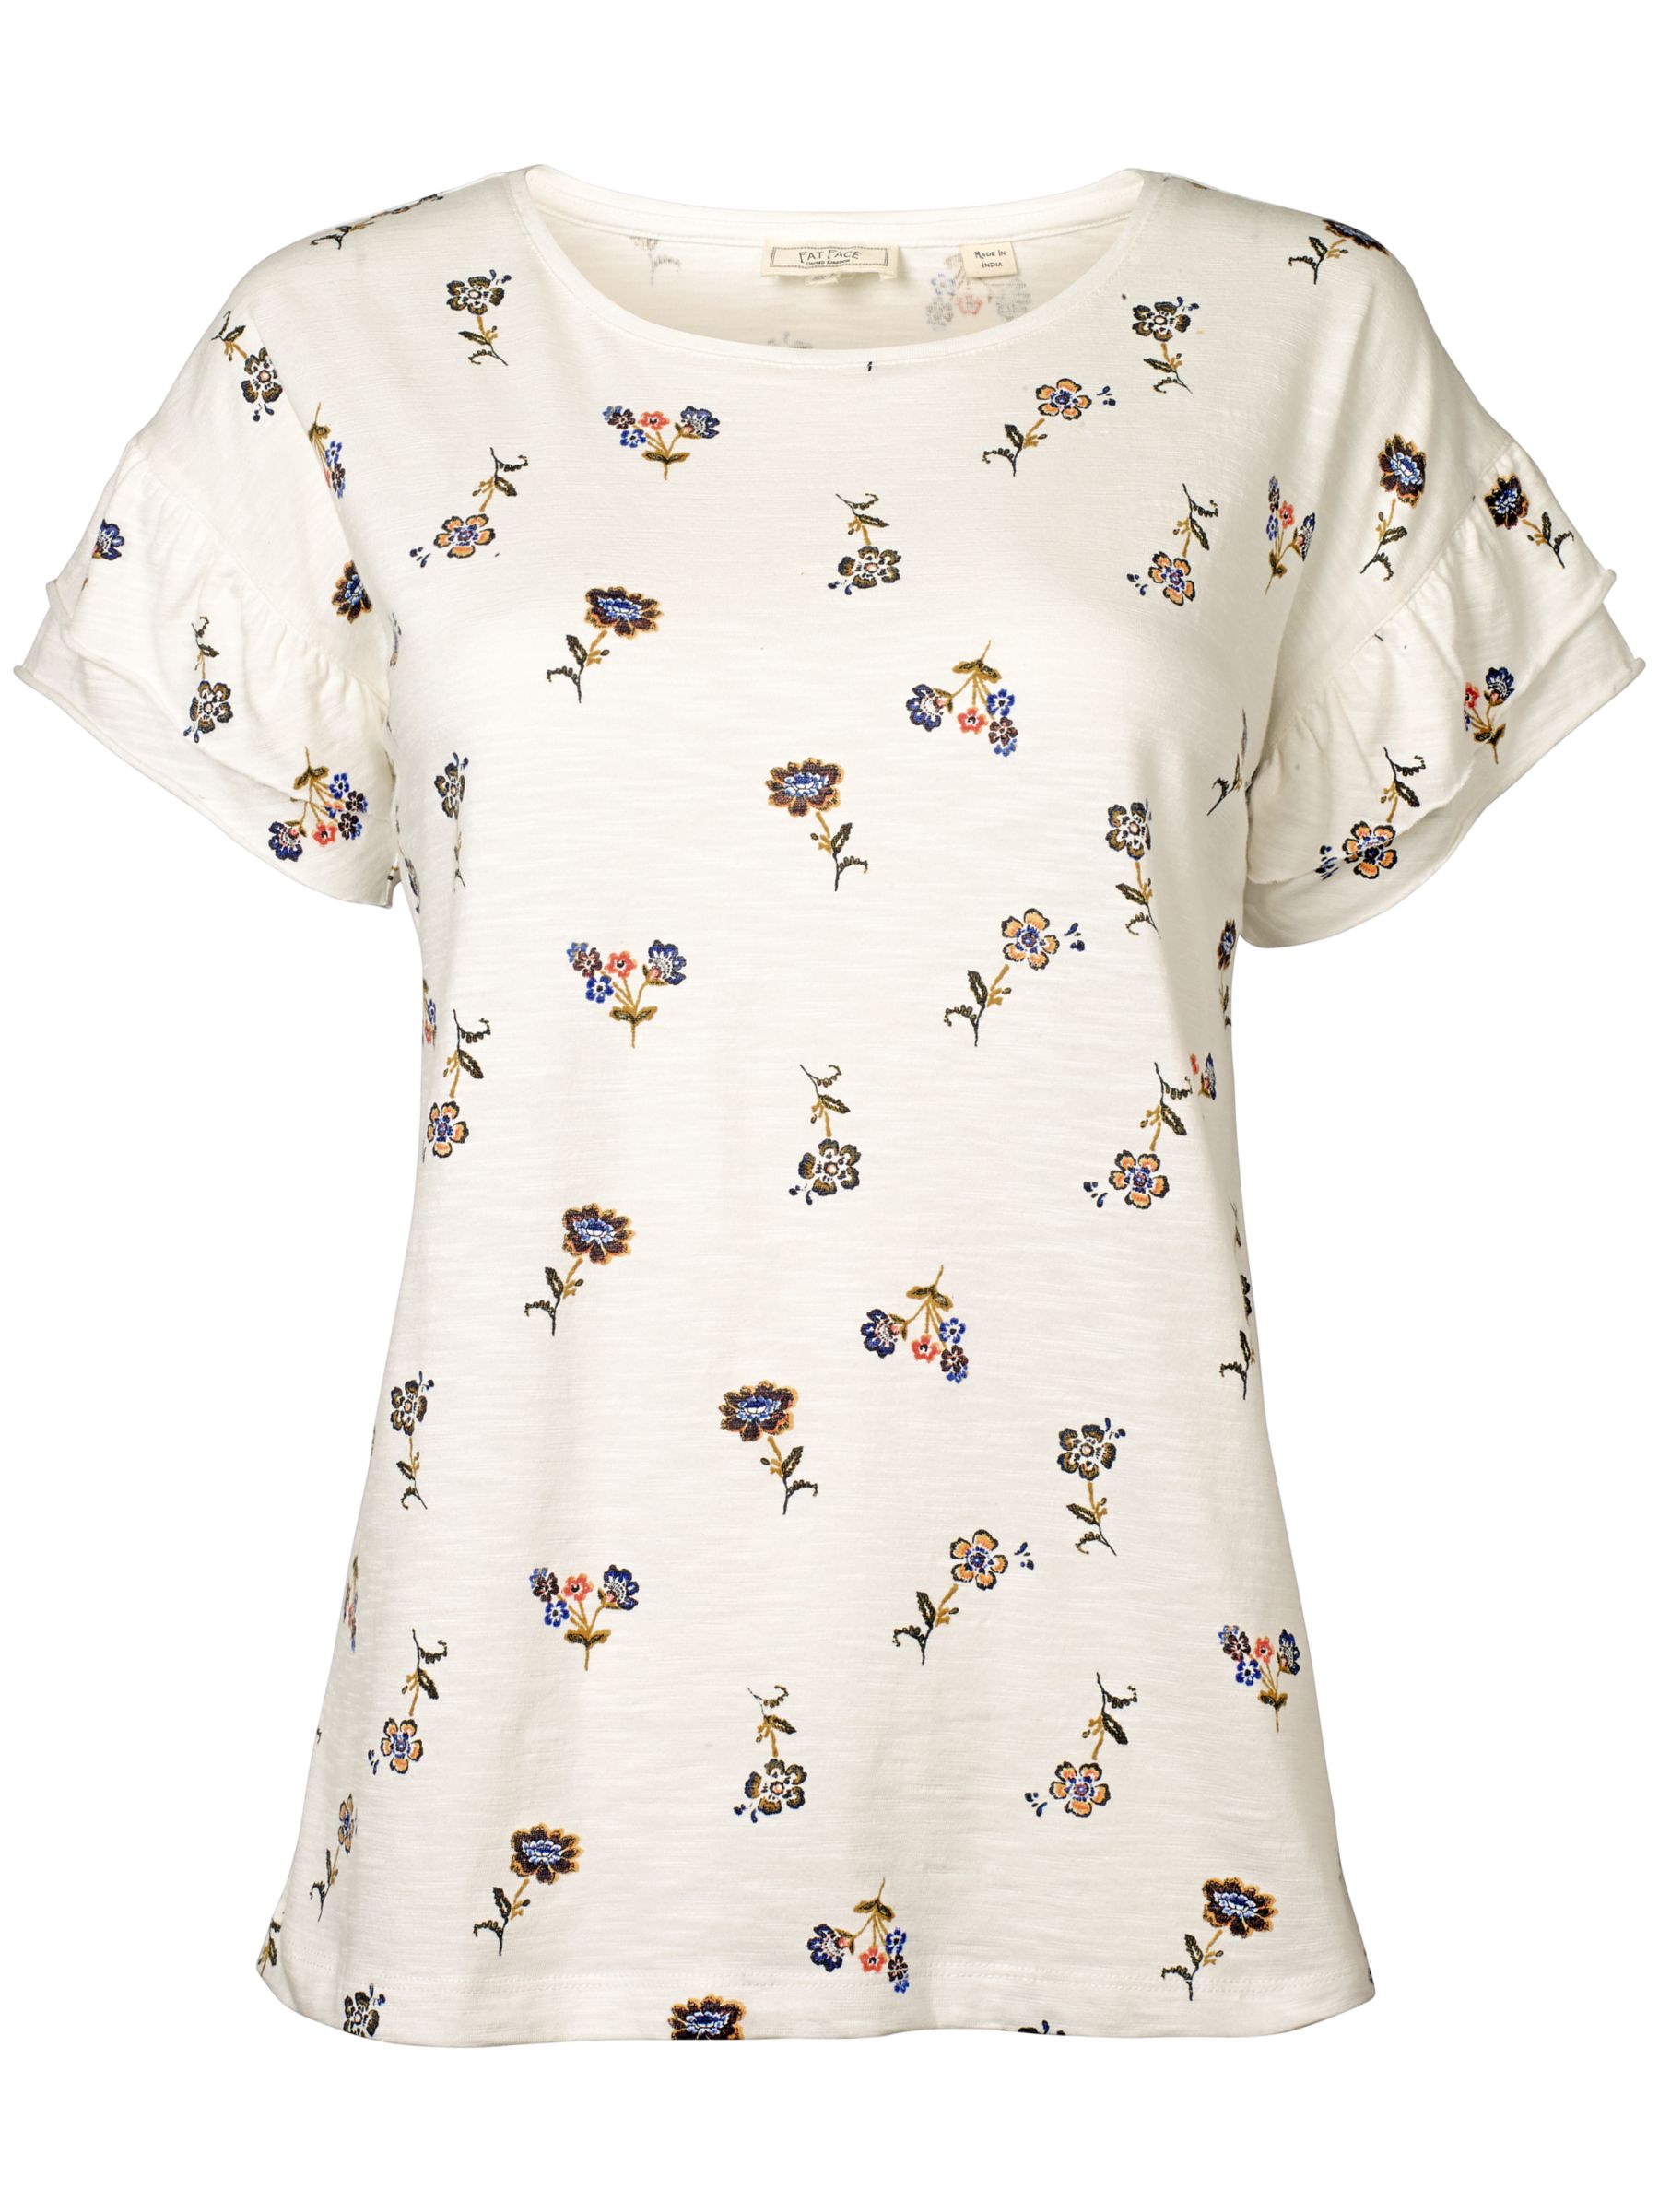 Fatface Floral Embroidered T-Shirt, Ivory